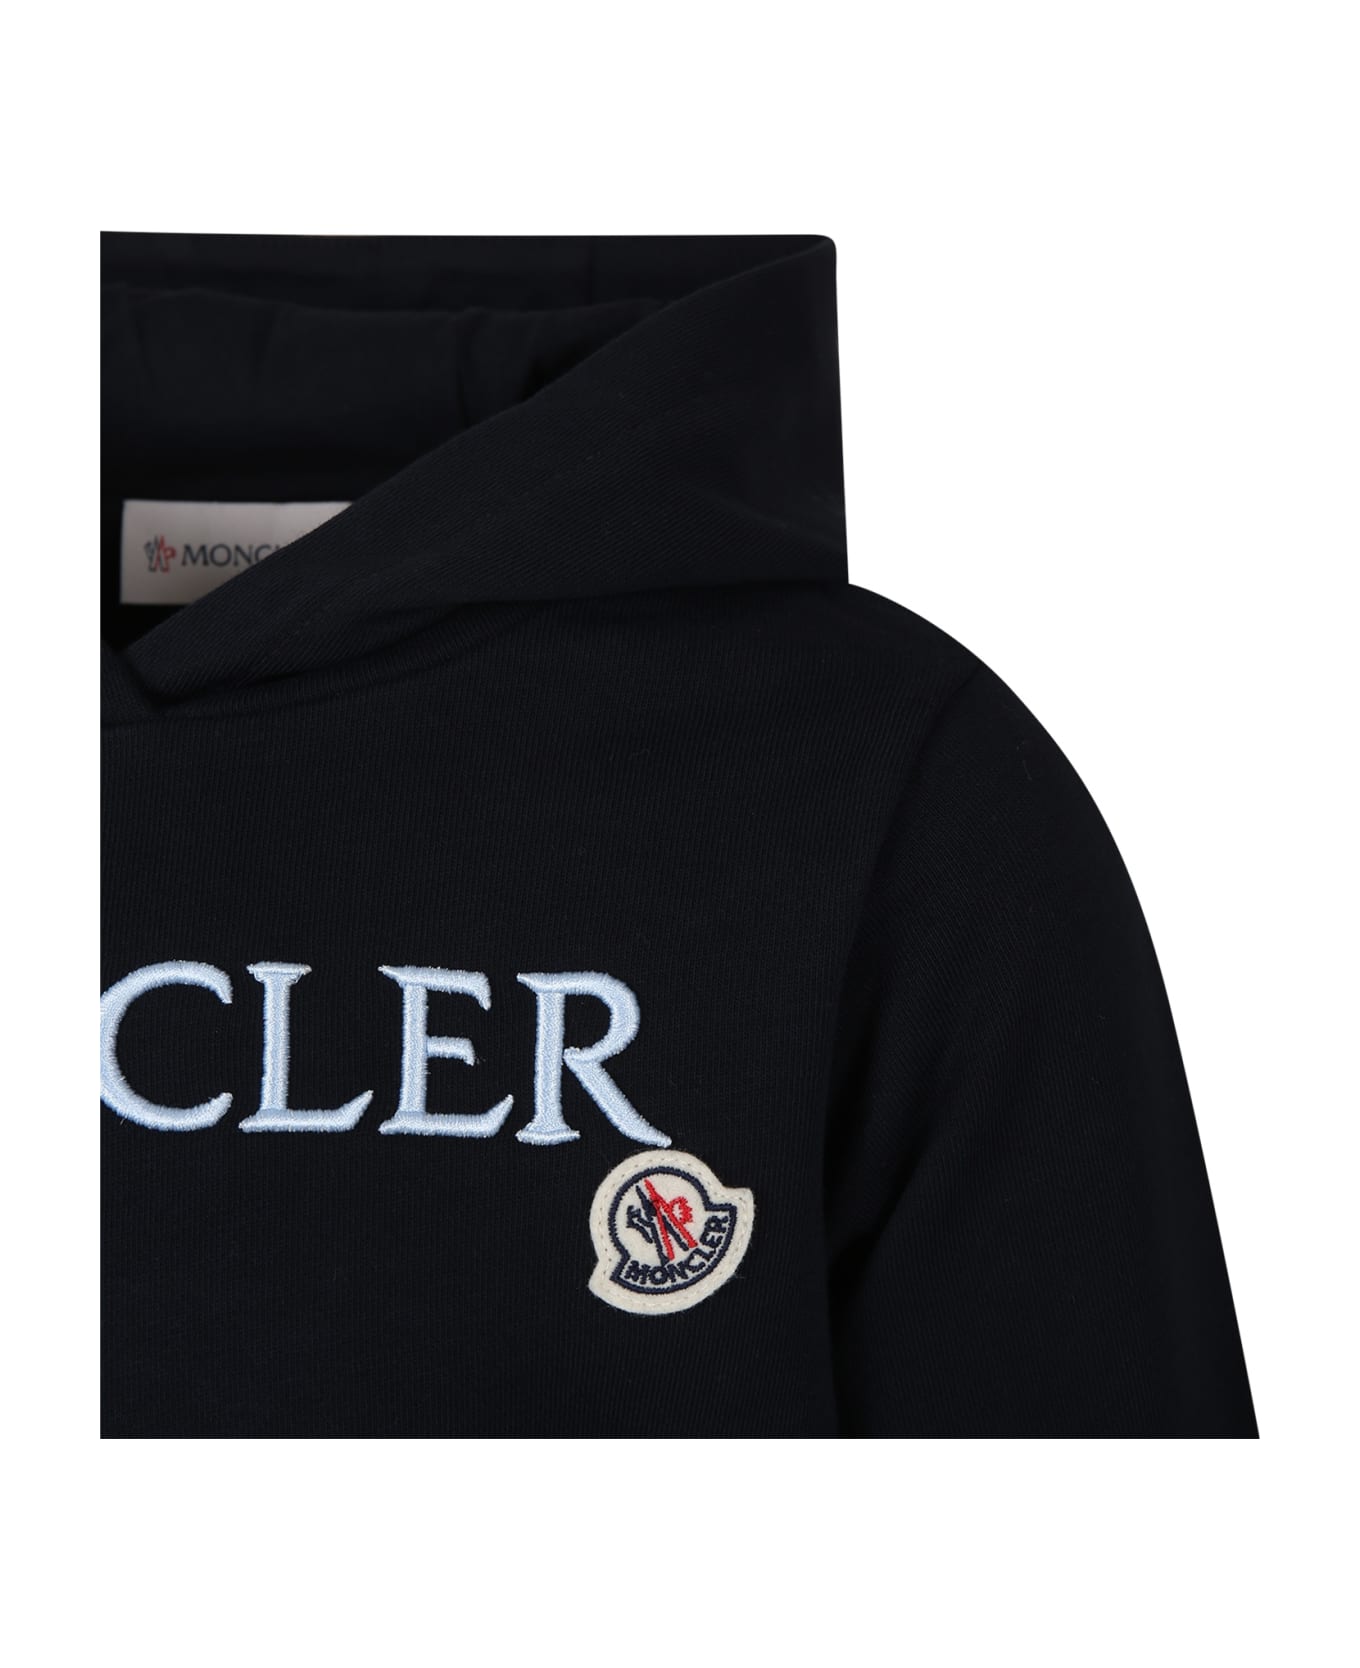 Moncler Blue Sweatshirt For Girl With Logo - Blue